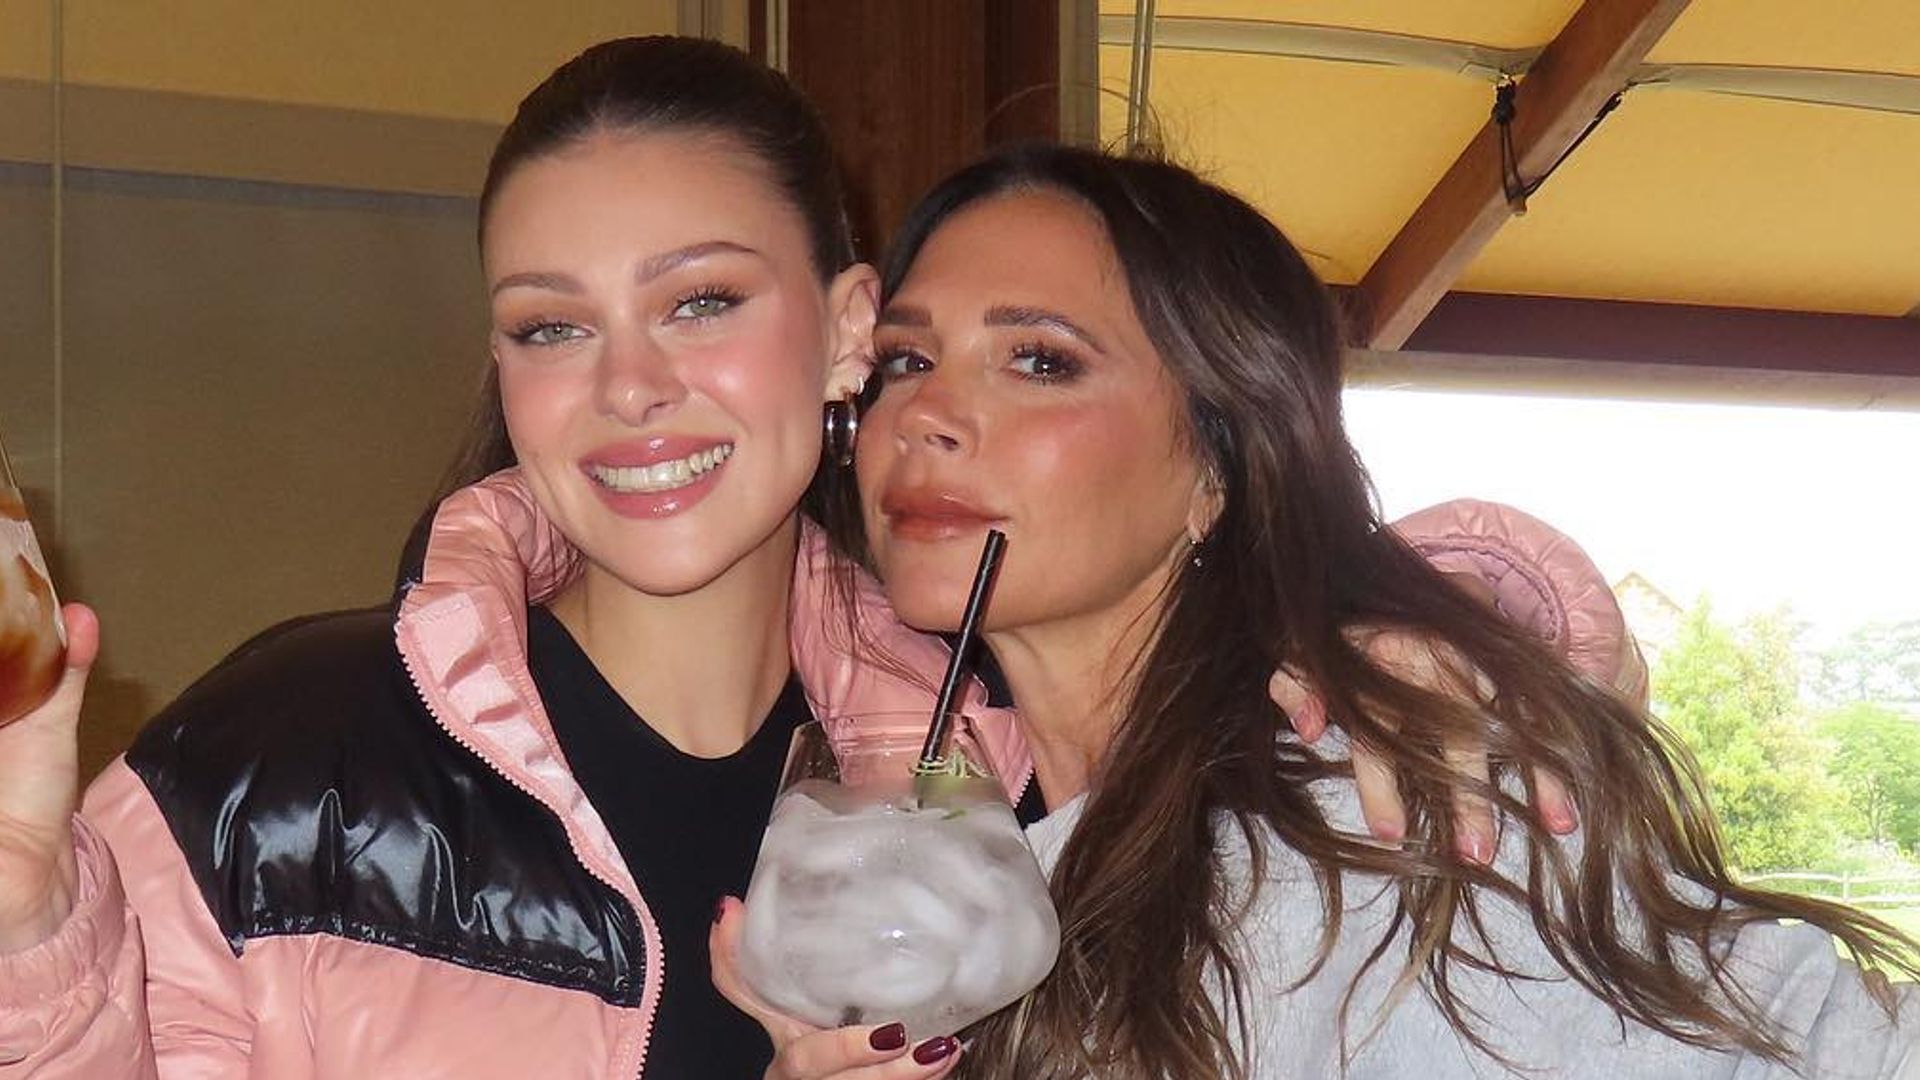 Nicola Peltz and Victoria Beckham's matching party outfits are a major mood